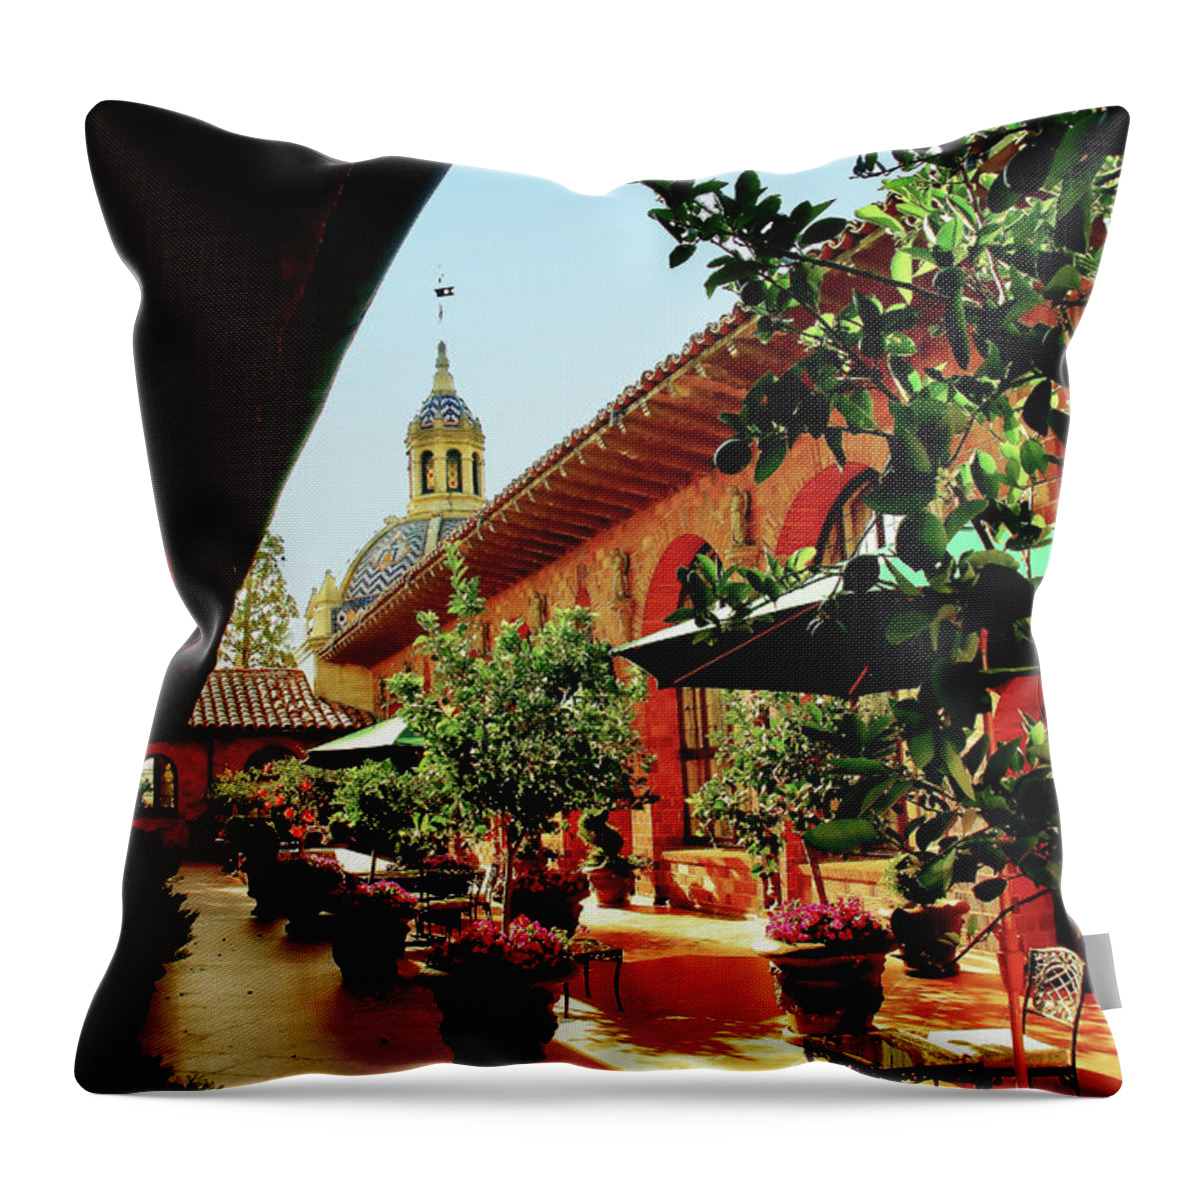 Patio Throw Pillow featuring the photograph Courtyard At The Inn by Joseph Hollingsworth